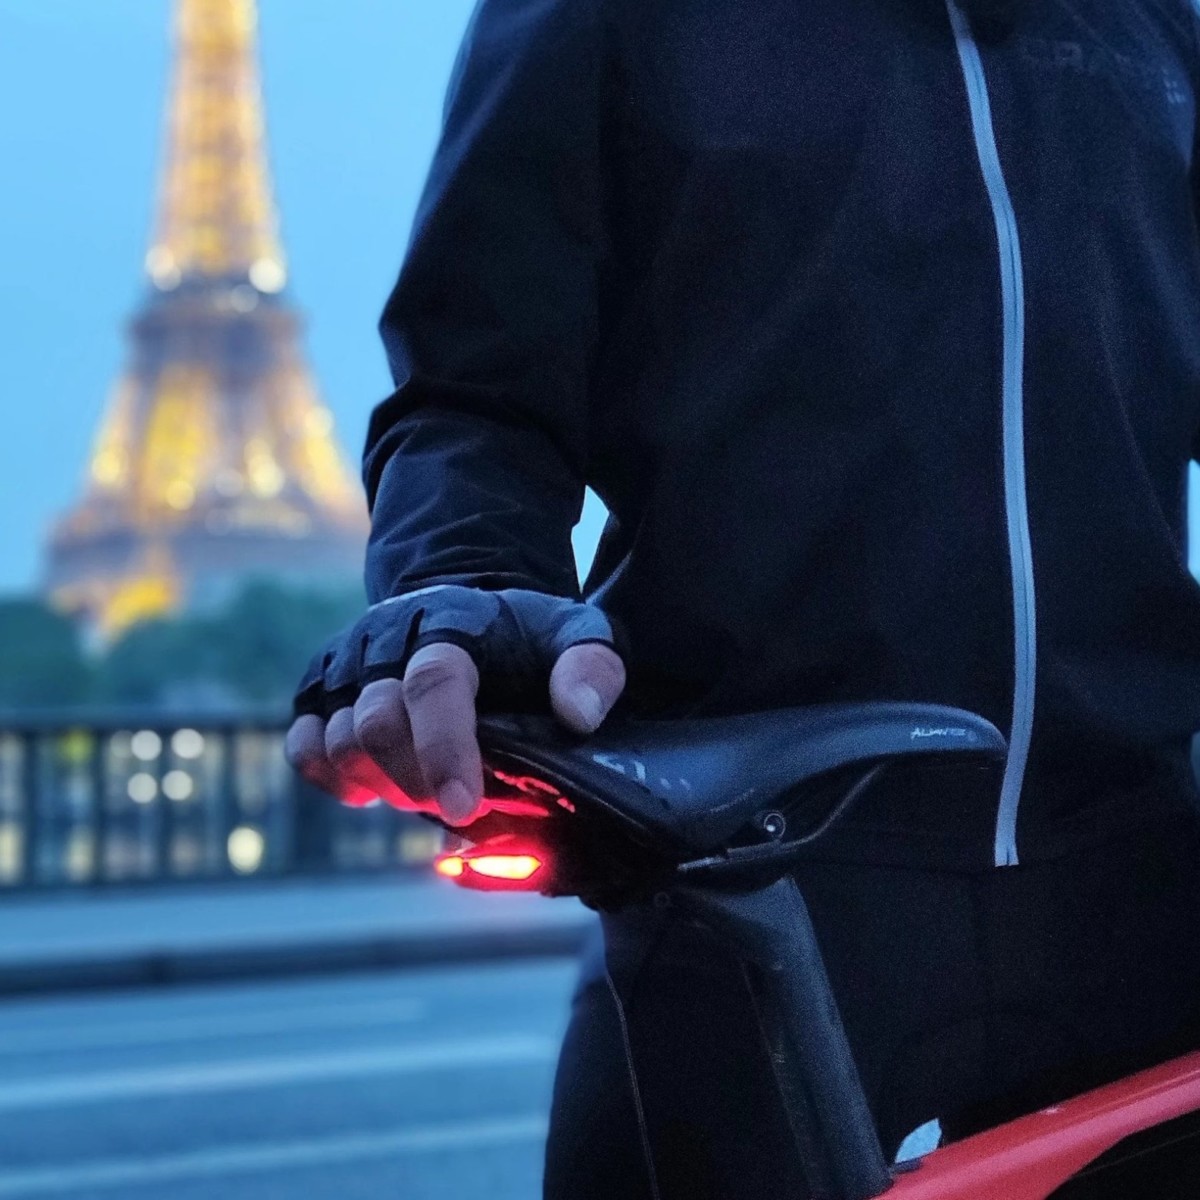 LUCIA Intelligent Bike Tail Light automatically adjusts to your surroundings